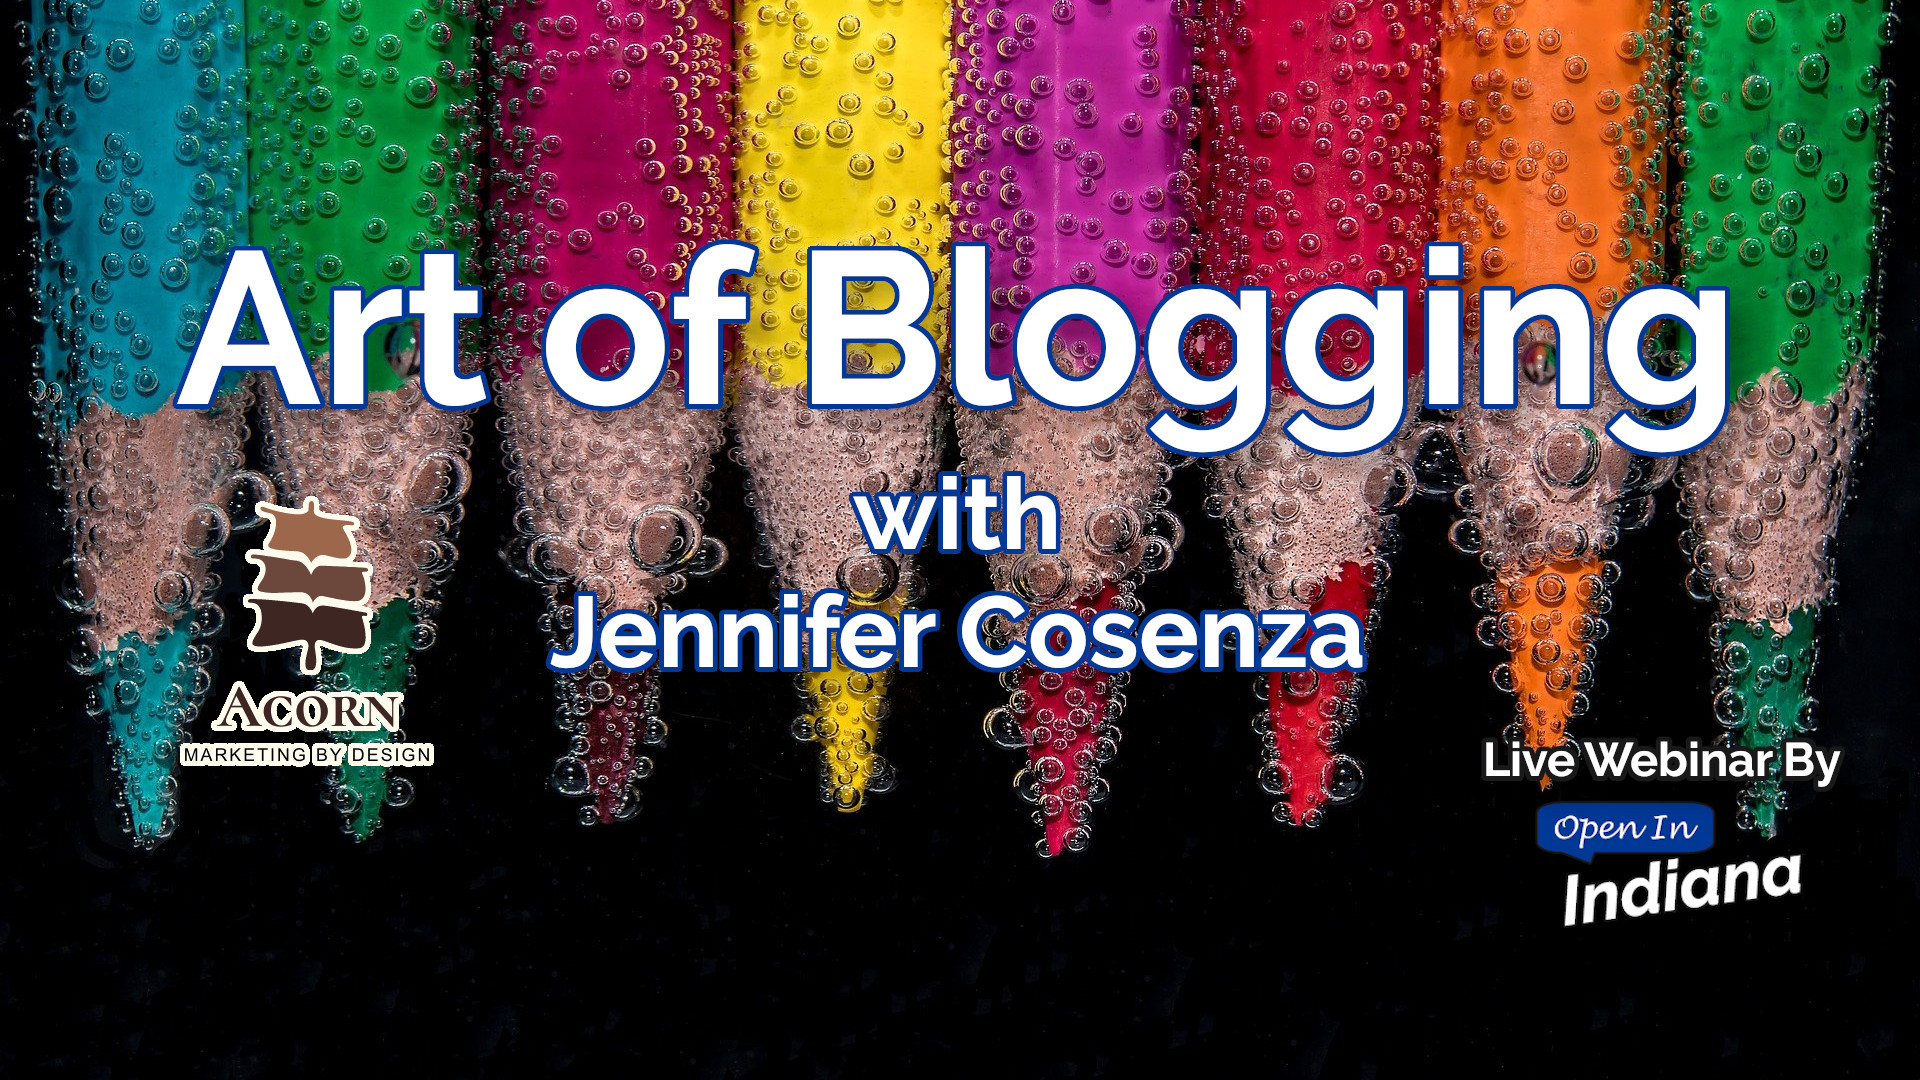 Art of Blogging with Jennifer Cosenza, Acorn Marketing by Design, Live Webinar by Open In Indiana, over a background image of colored pencils submerged under water.